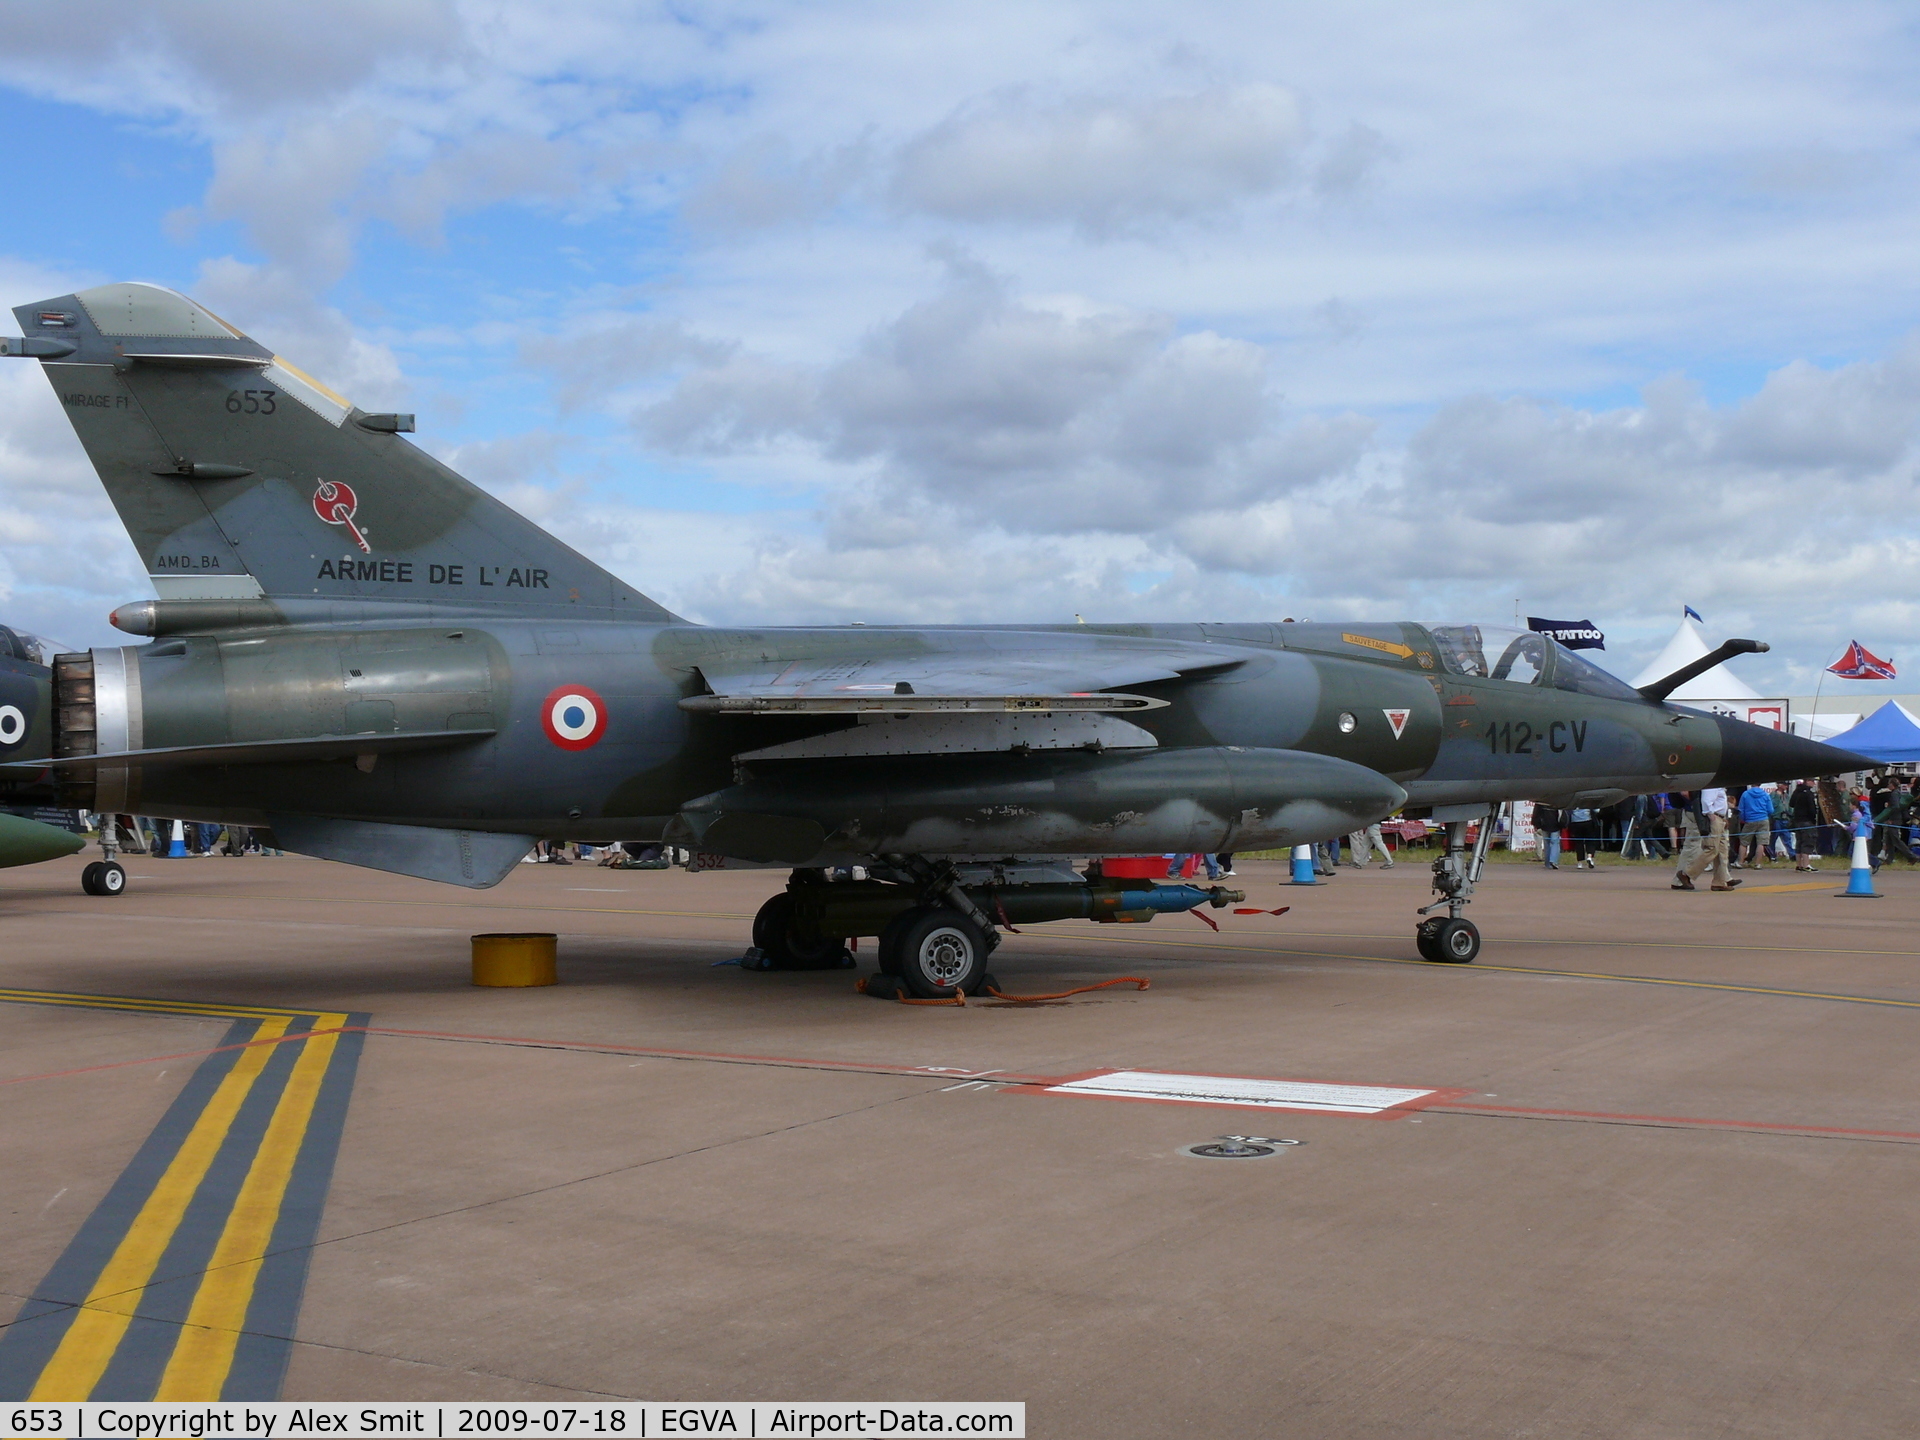 653, Dassault Mirage F.1CR C/N 653, Dassault Mirage F1CR 653/112-CV French Air Force